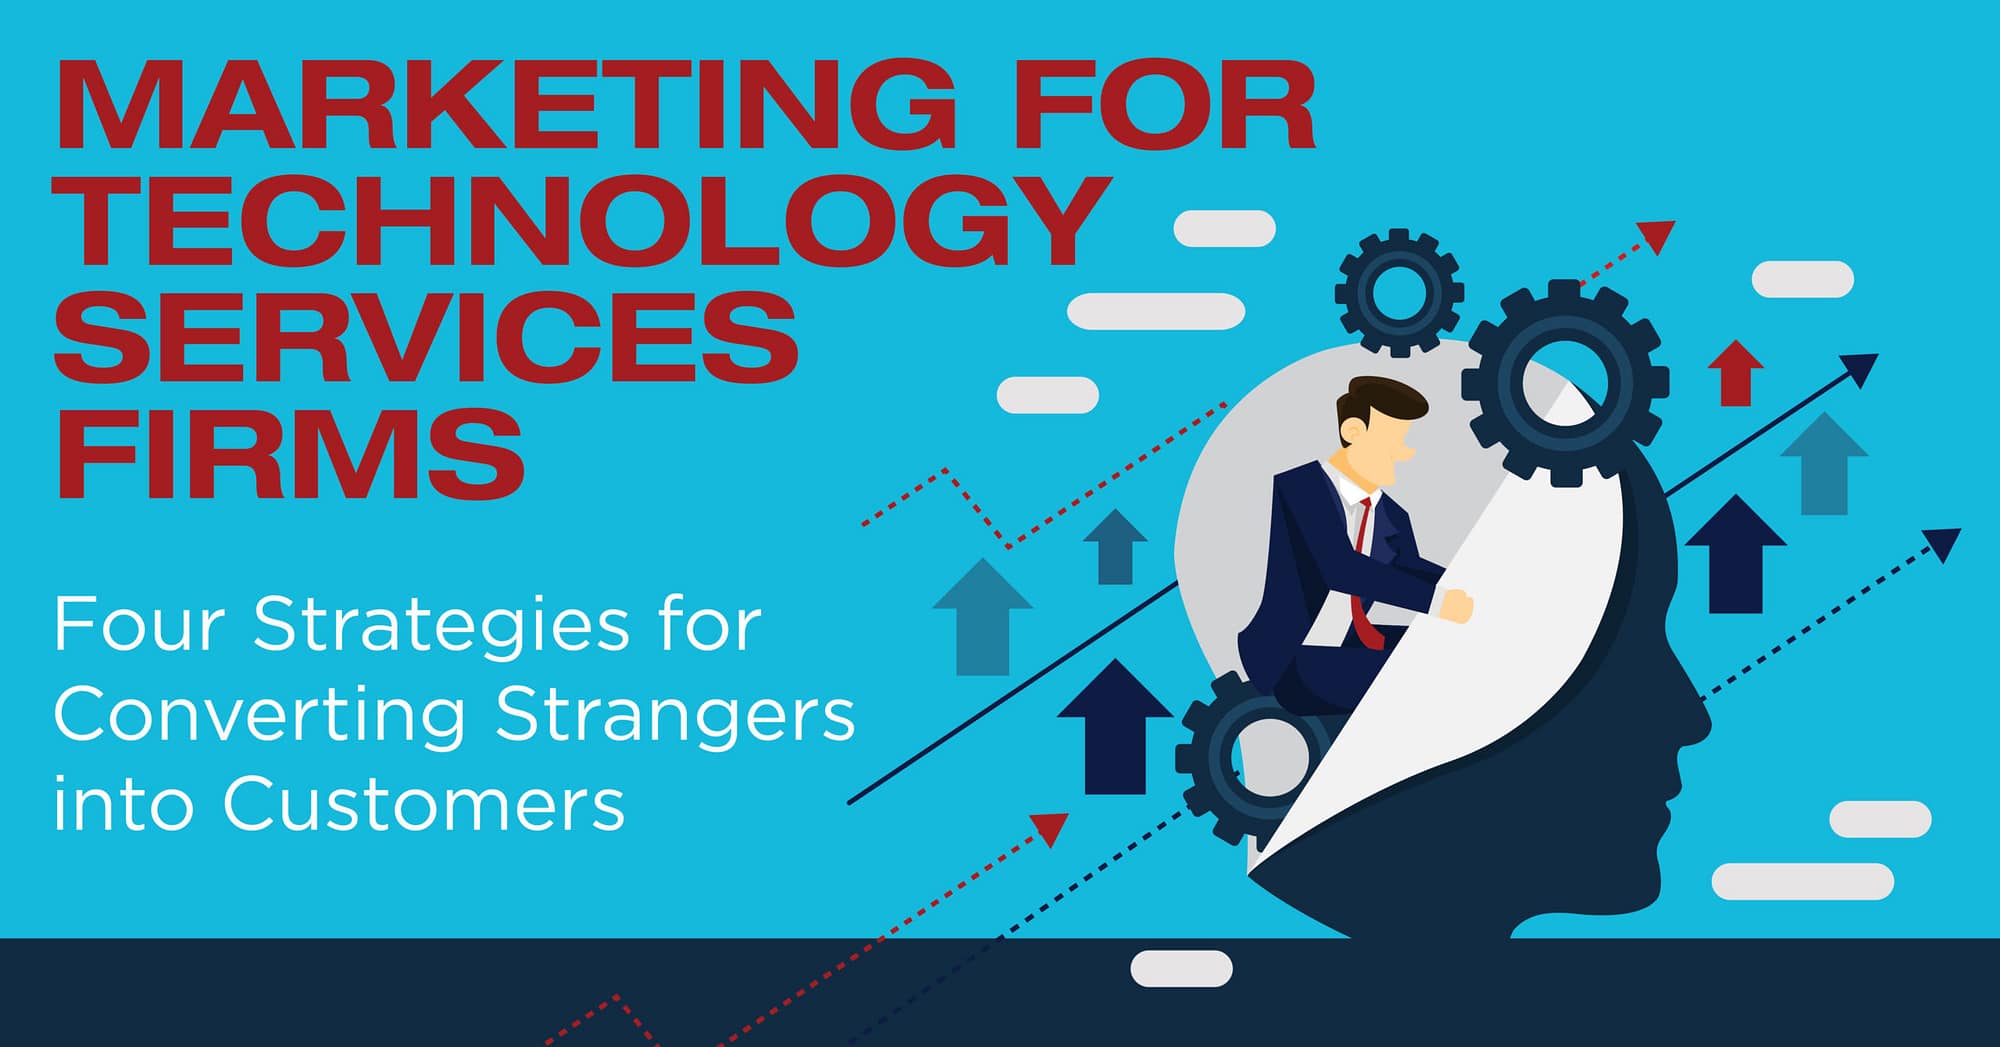 Marketing for Technology Services Firms: Four Strategies for Converting Strangers into Customers